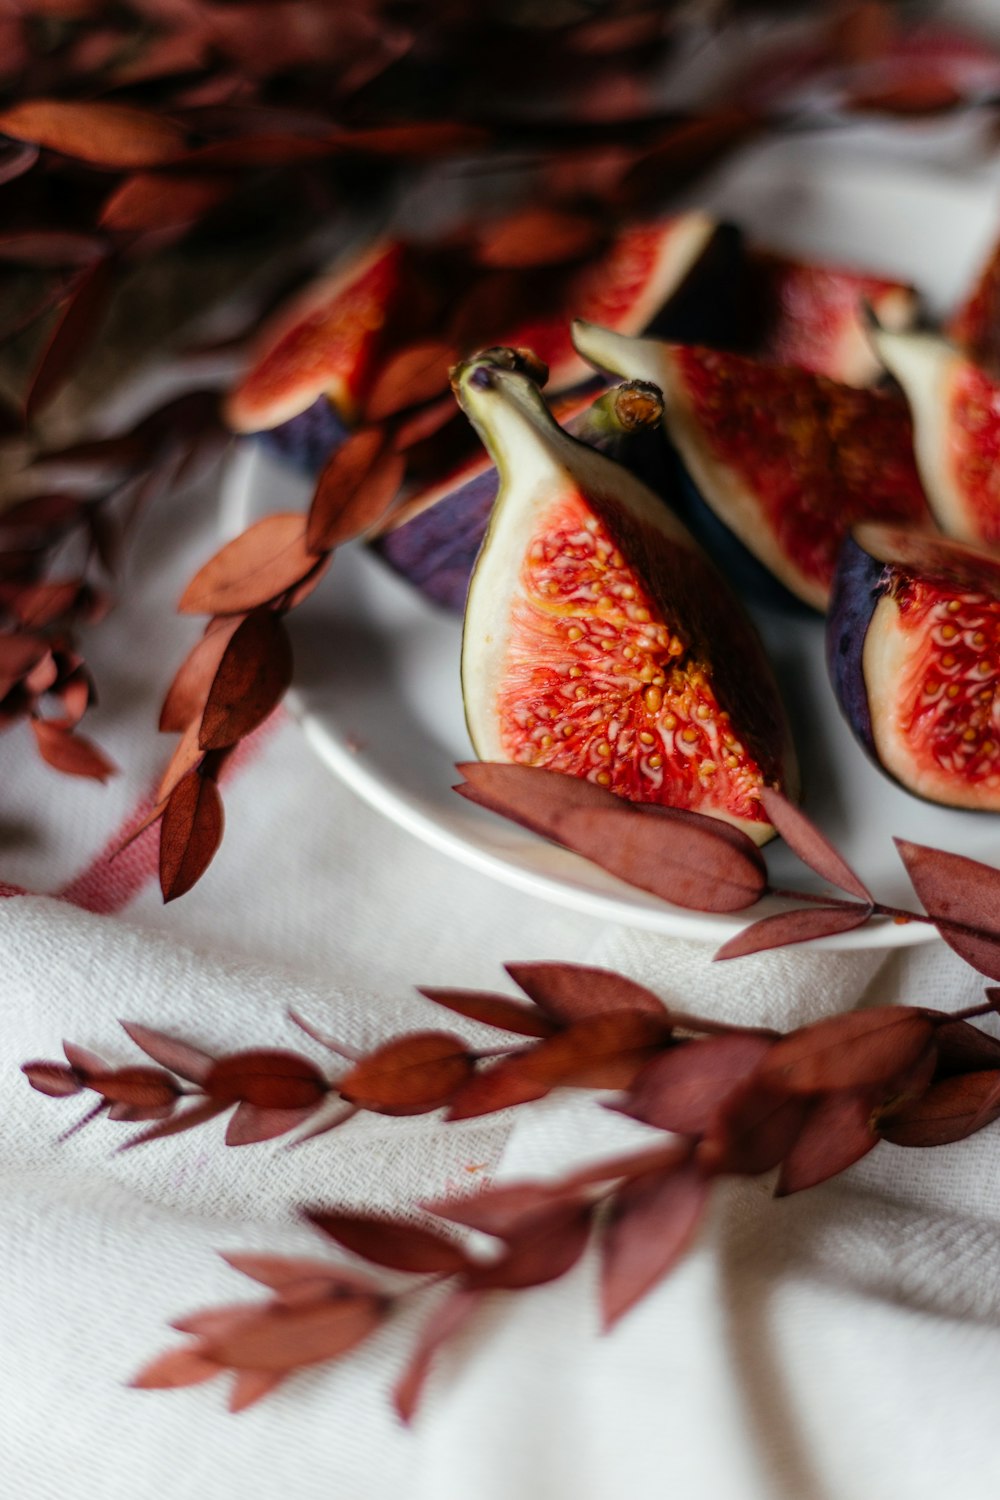 a plate of sliced figs and leaves on a table